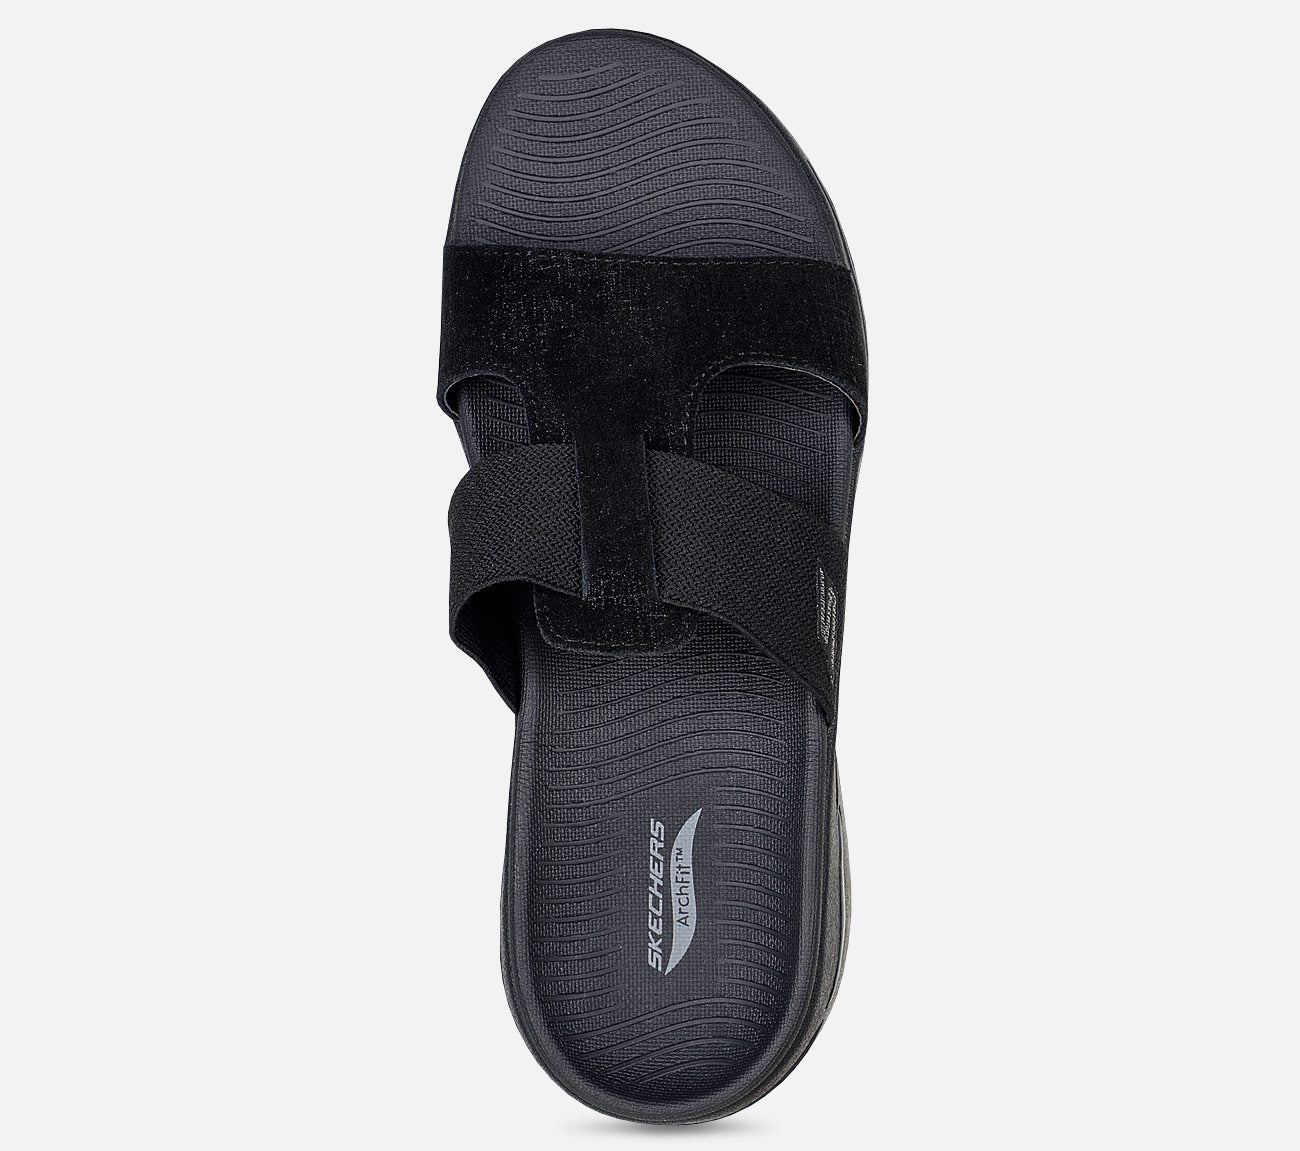 GO WALK Arch Fit Sandal - Lively